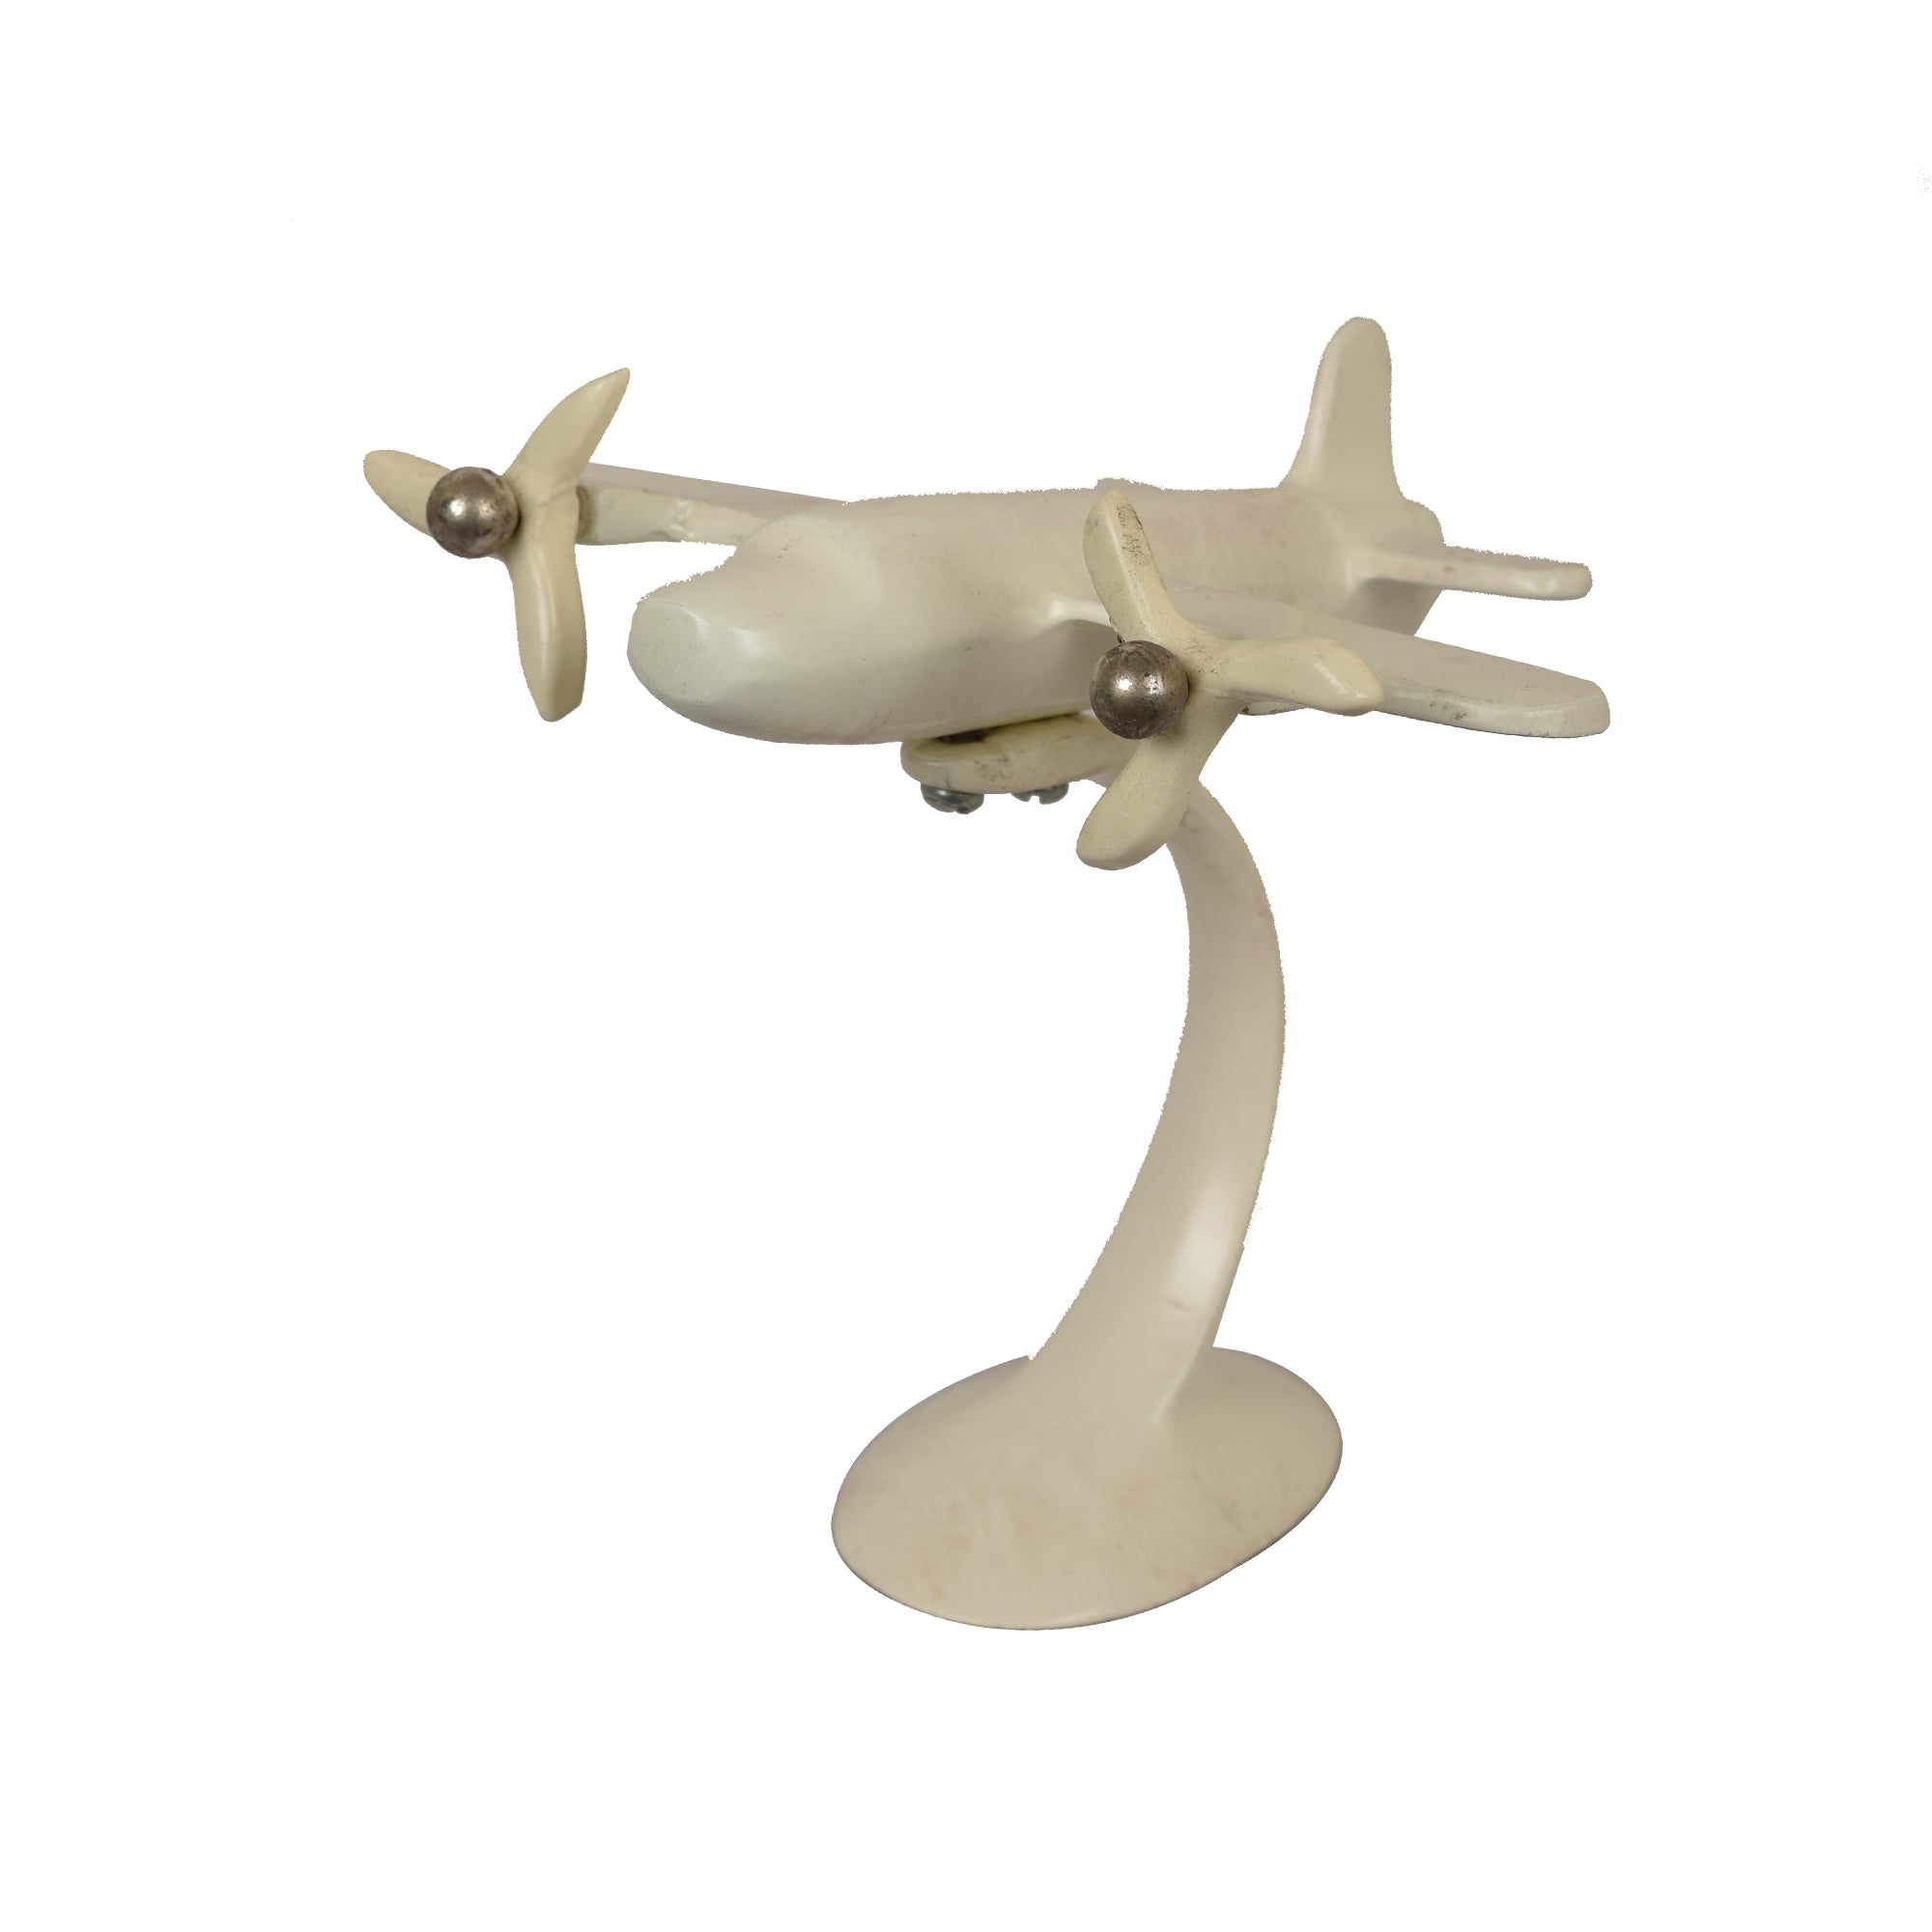 Aeroplane Sculpture 7 inches tall- White Ivory